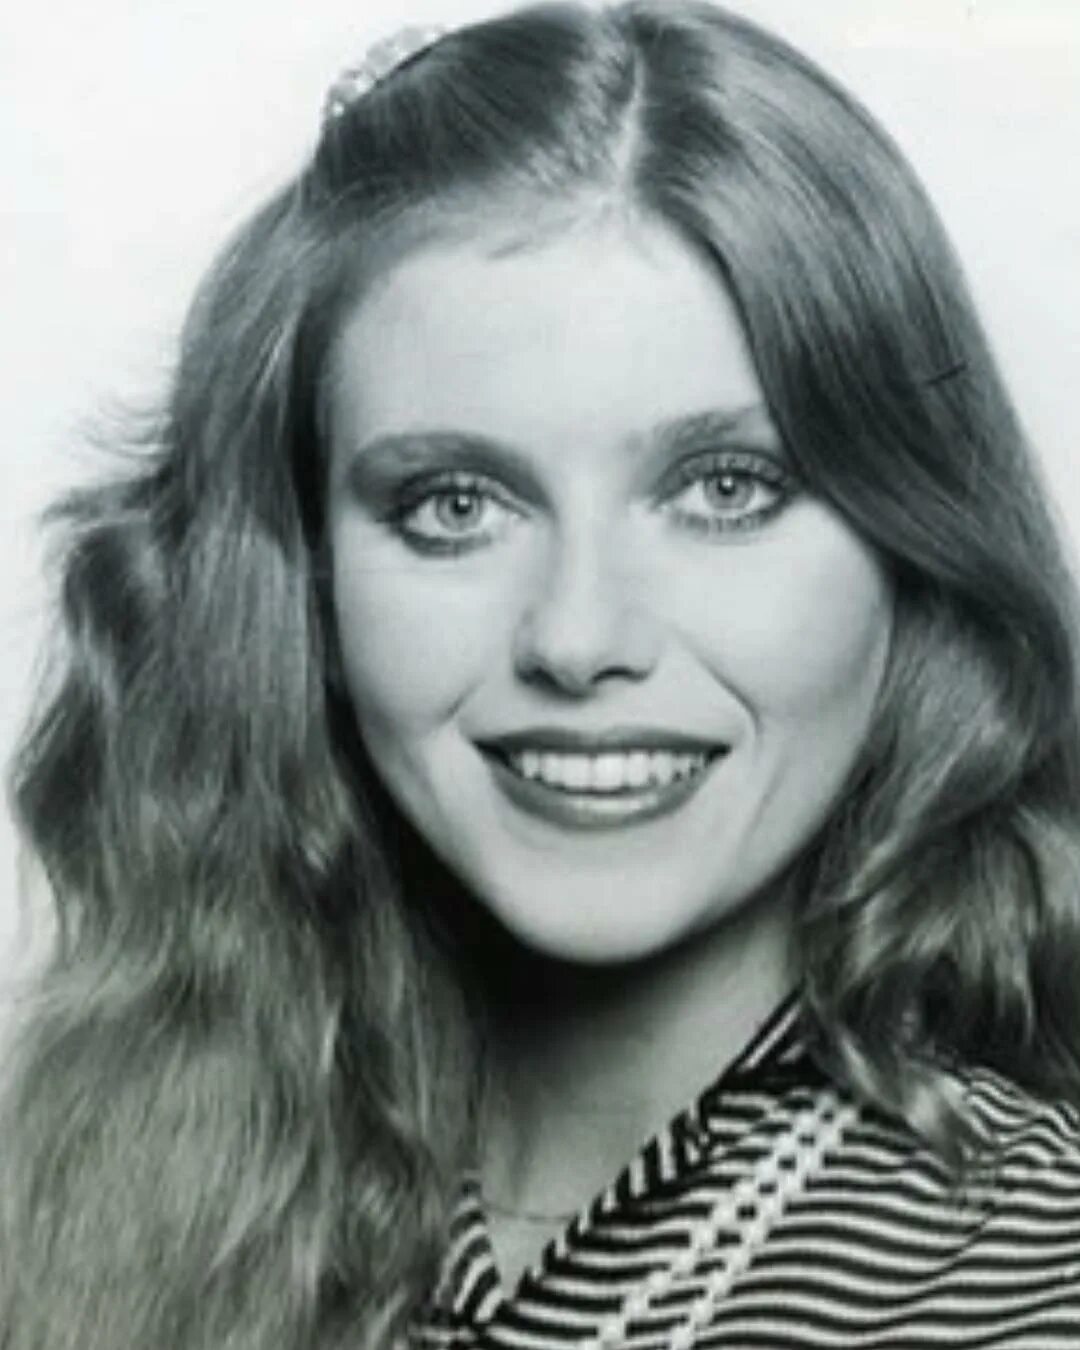 635 Likes, 25 Comments - Bebe Buell (@realbebebuell) on Instagram